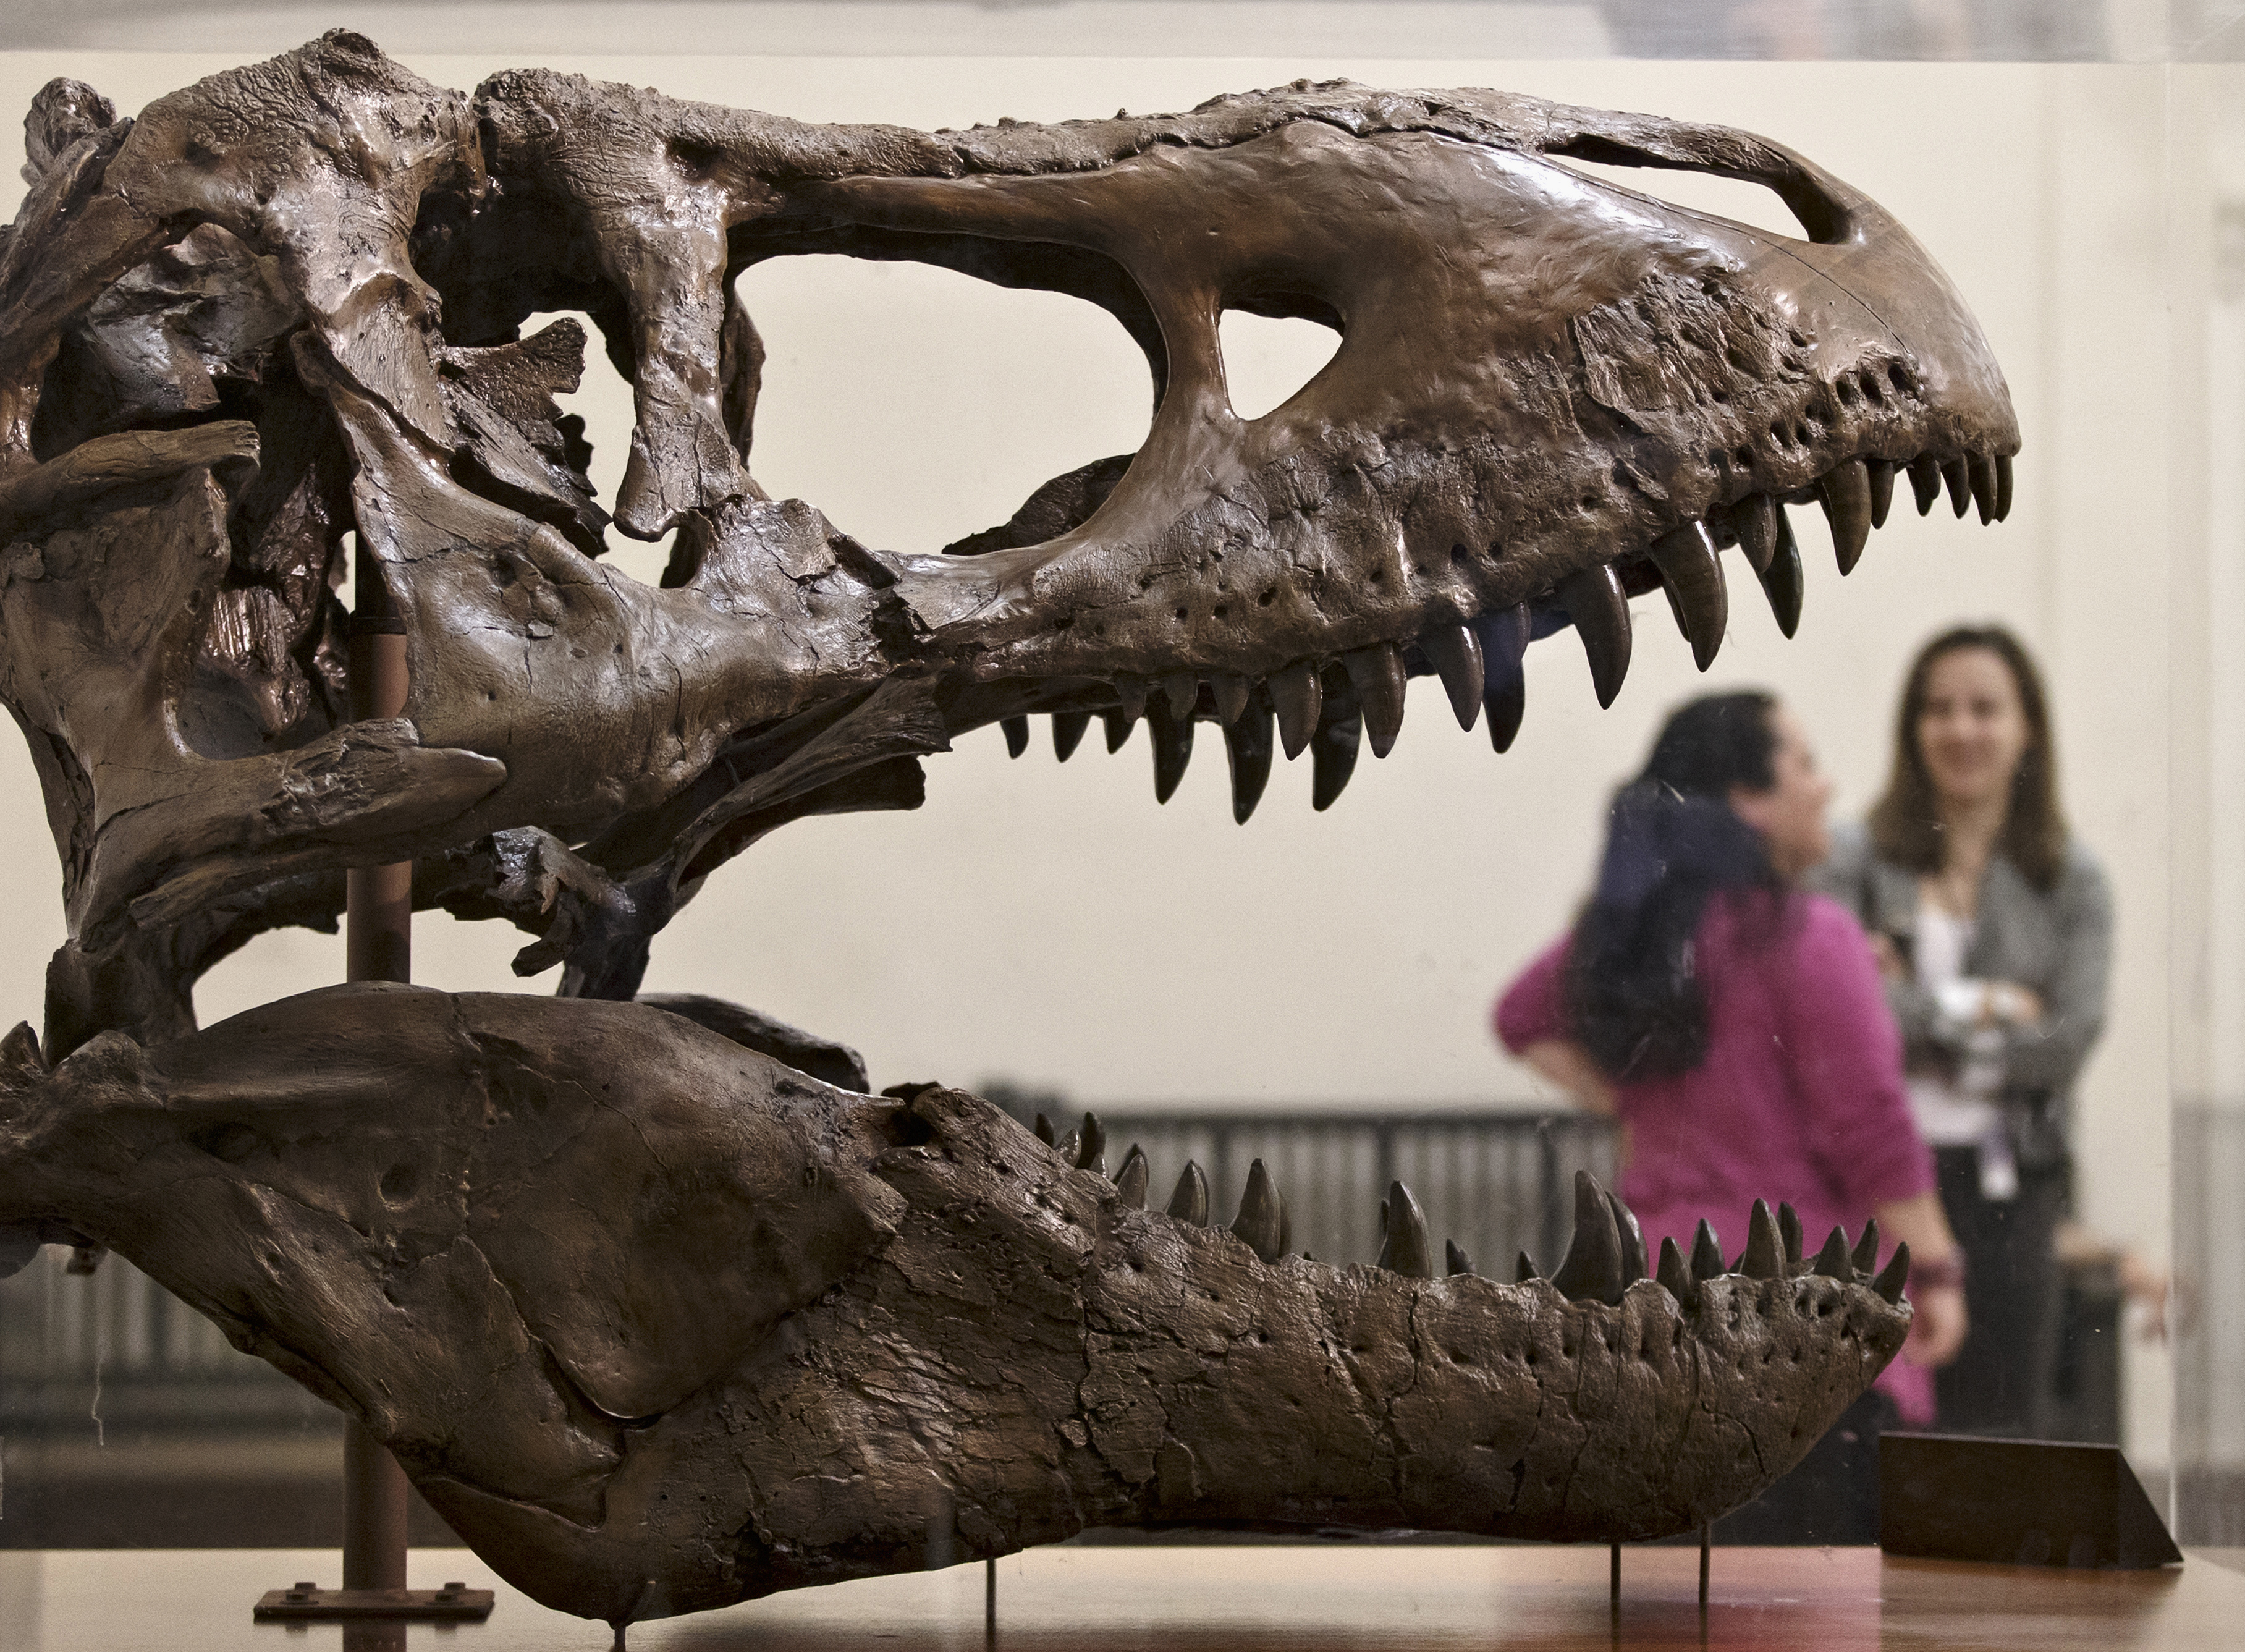 In this April 15, 2014 file photo, a cast of a Tyrannosaurus rex discovered in Montana greets visitors as they enter the Smithsonian Museum of Natural History in Washington. (AP Photo/J. Scott Applewhite, File)